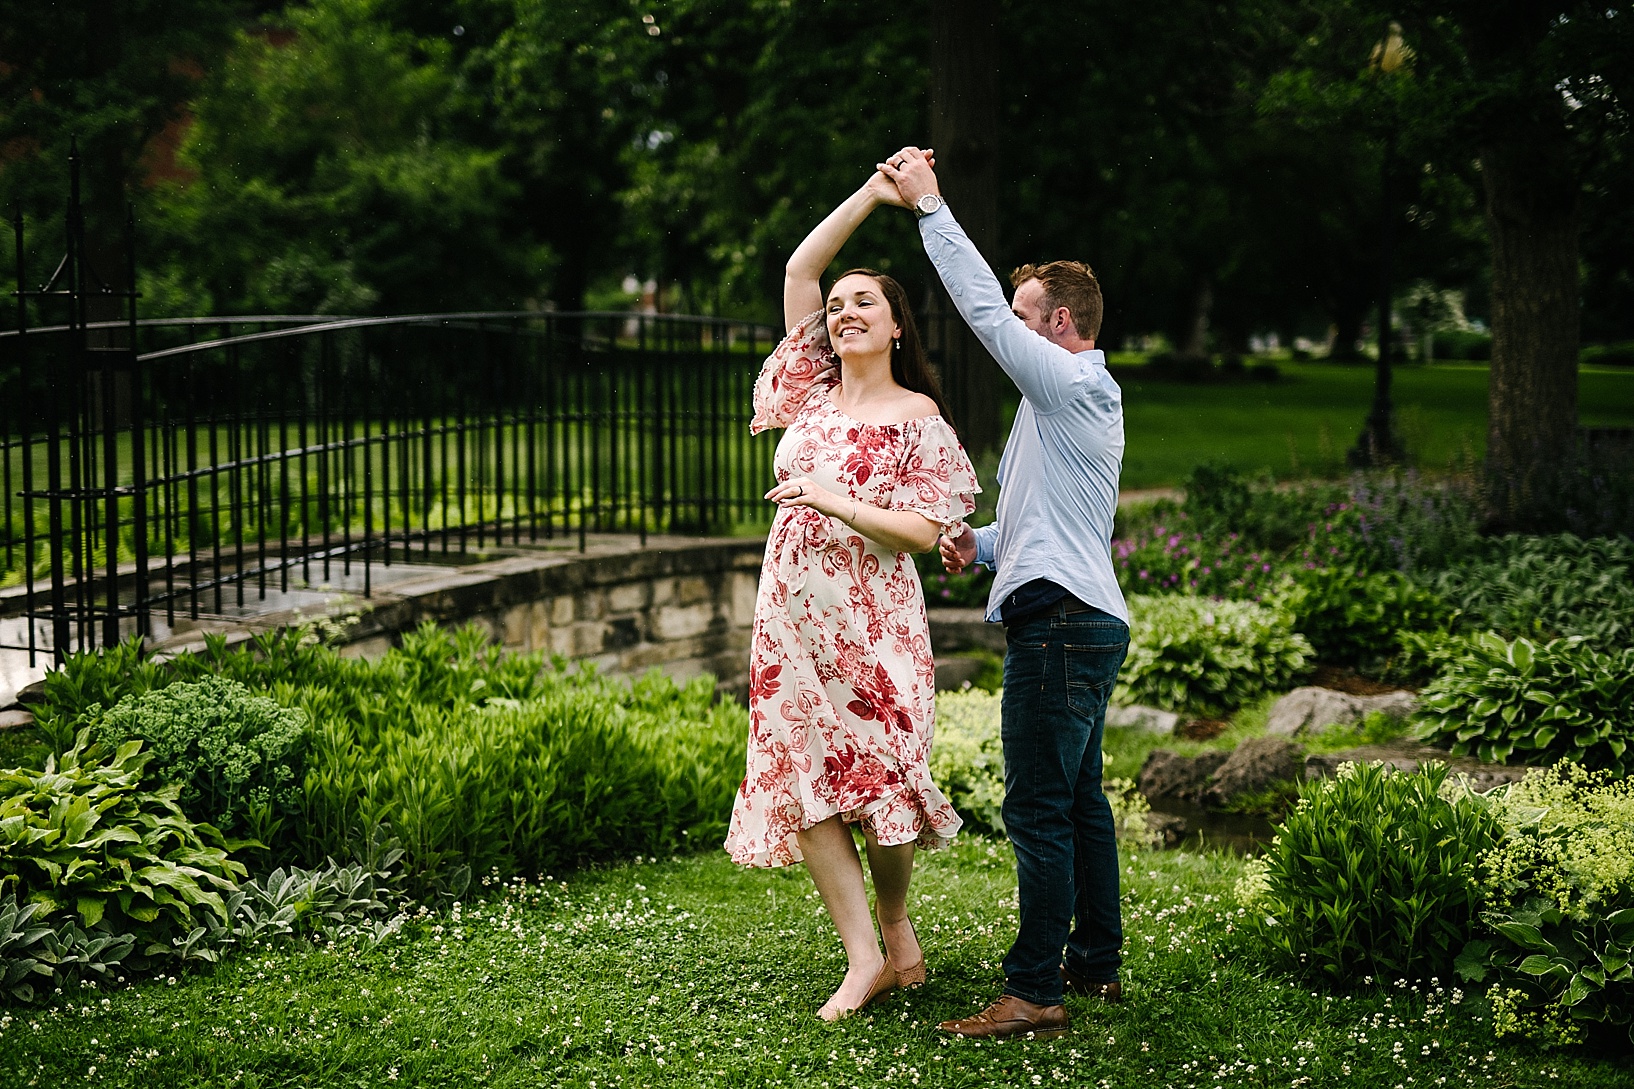 Husband twirls pregnant wife in a garden during rainy maternity session